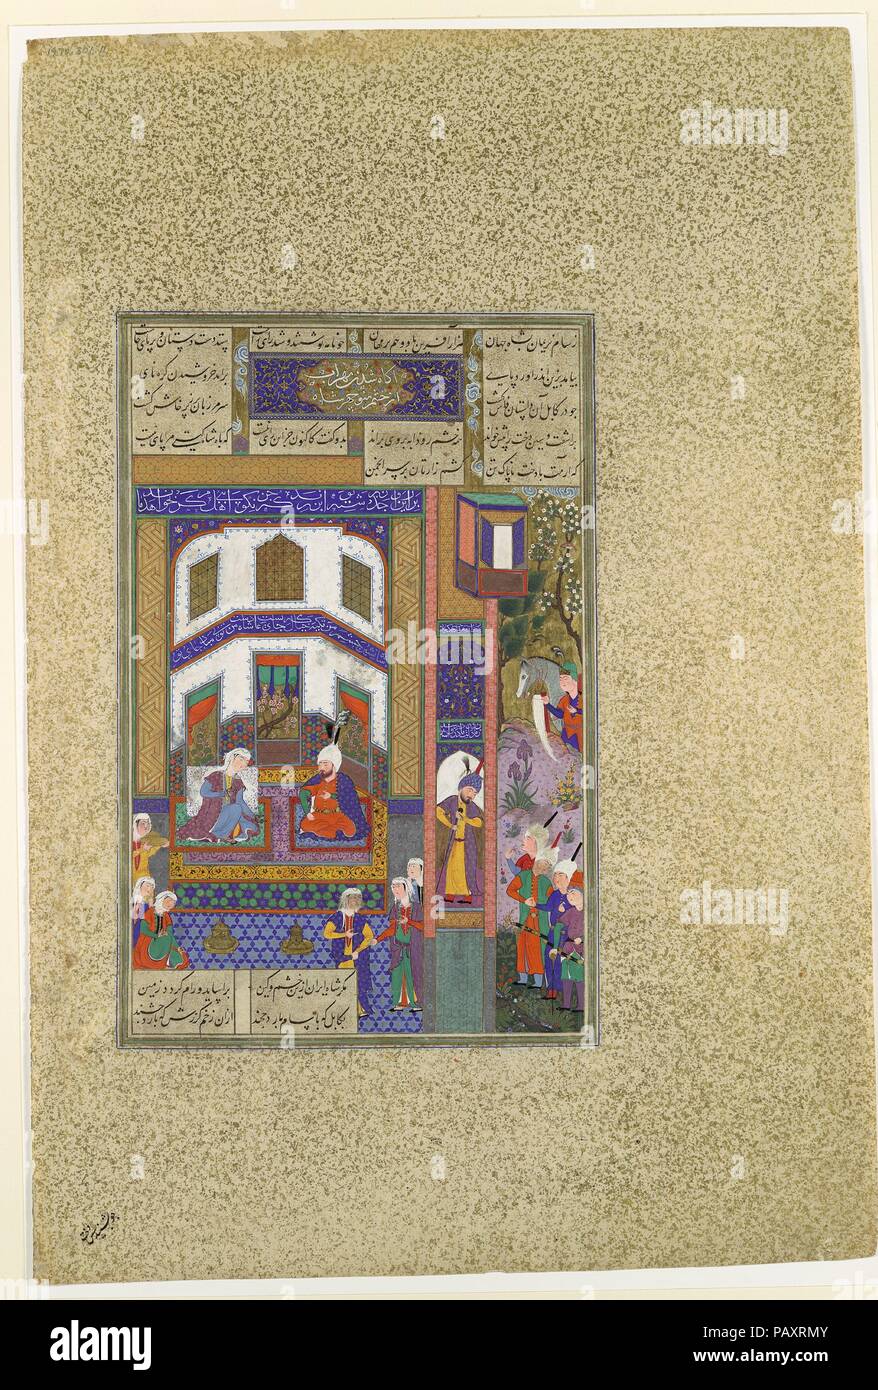 'Mihrab Vents His Anger Upon Sindukht', Folio 83v from the Shahnama (Book of Kings) of Shah Tahmasp. Artist: Painting attributed to Qadimi (active ca. 1525-65); Painting attributed to 'Abd al-Vahhab. Author: Abu'l Qasim Firdausi (935-1020). Dimensions: Painting: H. 10 15/16 in. (27.8 cm)   W. 7 1/8 in. (18.1 cm)  Page: H. 18 1/2 in. (47 cm)   W. 12 7/16 in. (31.6 cm)  Mat: H. 22 in. (55.9 cm)   W. 16 in. (40.6 cm). Date: ca. 1525-30.  When Mihrab of Kabul first heard of his daughter Rudaba's secret love affair with Zal, he wanted to kill her, but his wife Sindukht persuaded him that Sam, Zal's Stock Photo